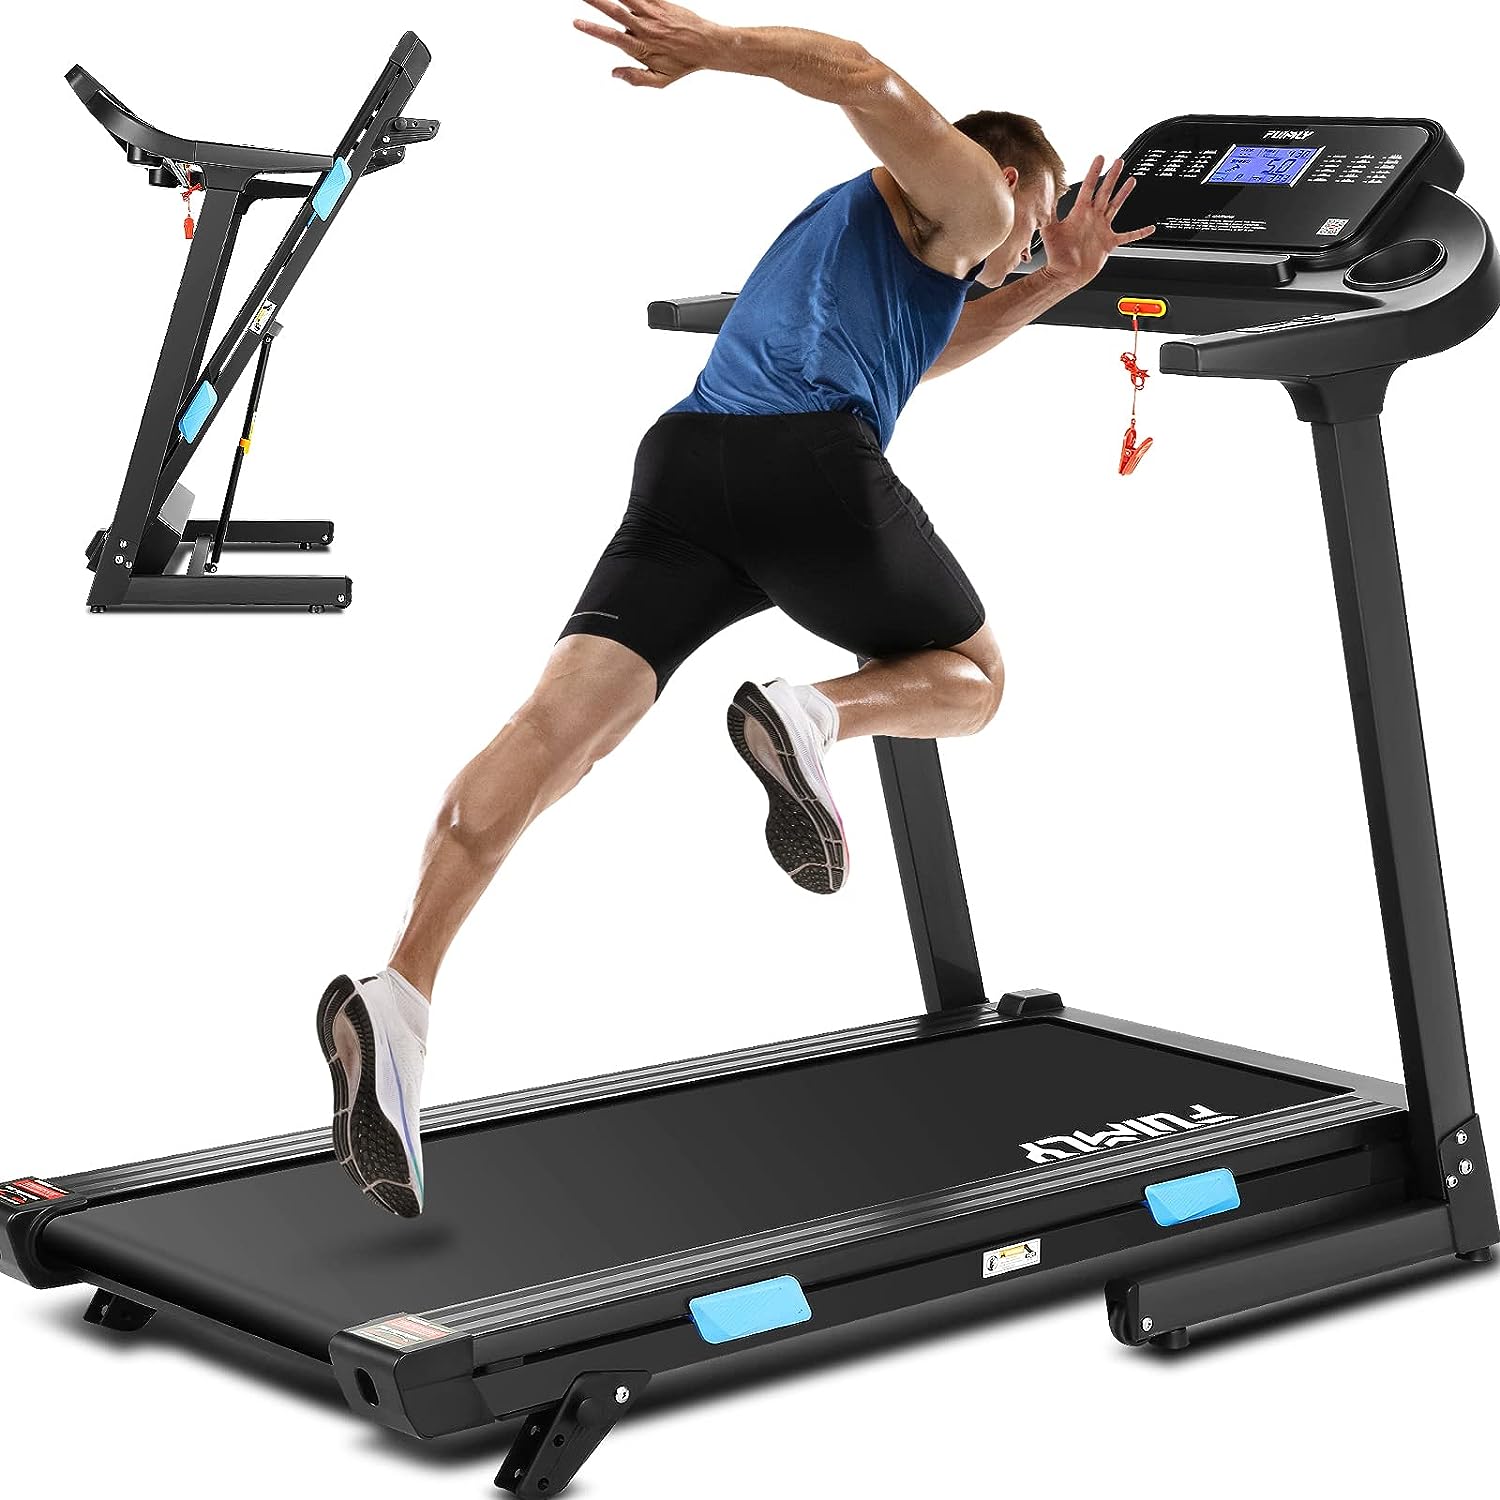 Treadmill with Incline, ANCHEER 3.25HP 18 INCH Wide Treadmill for Home, Walking Pad 300lb Capacity, Running Machine with 36 Preset Programs, 18x51 Running Belt, LCD Display, App Control